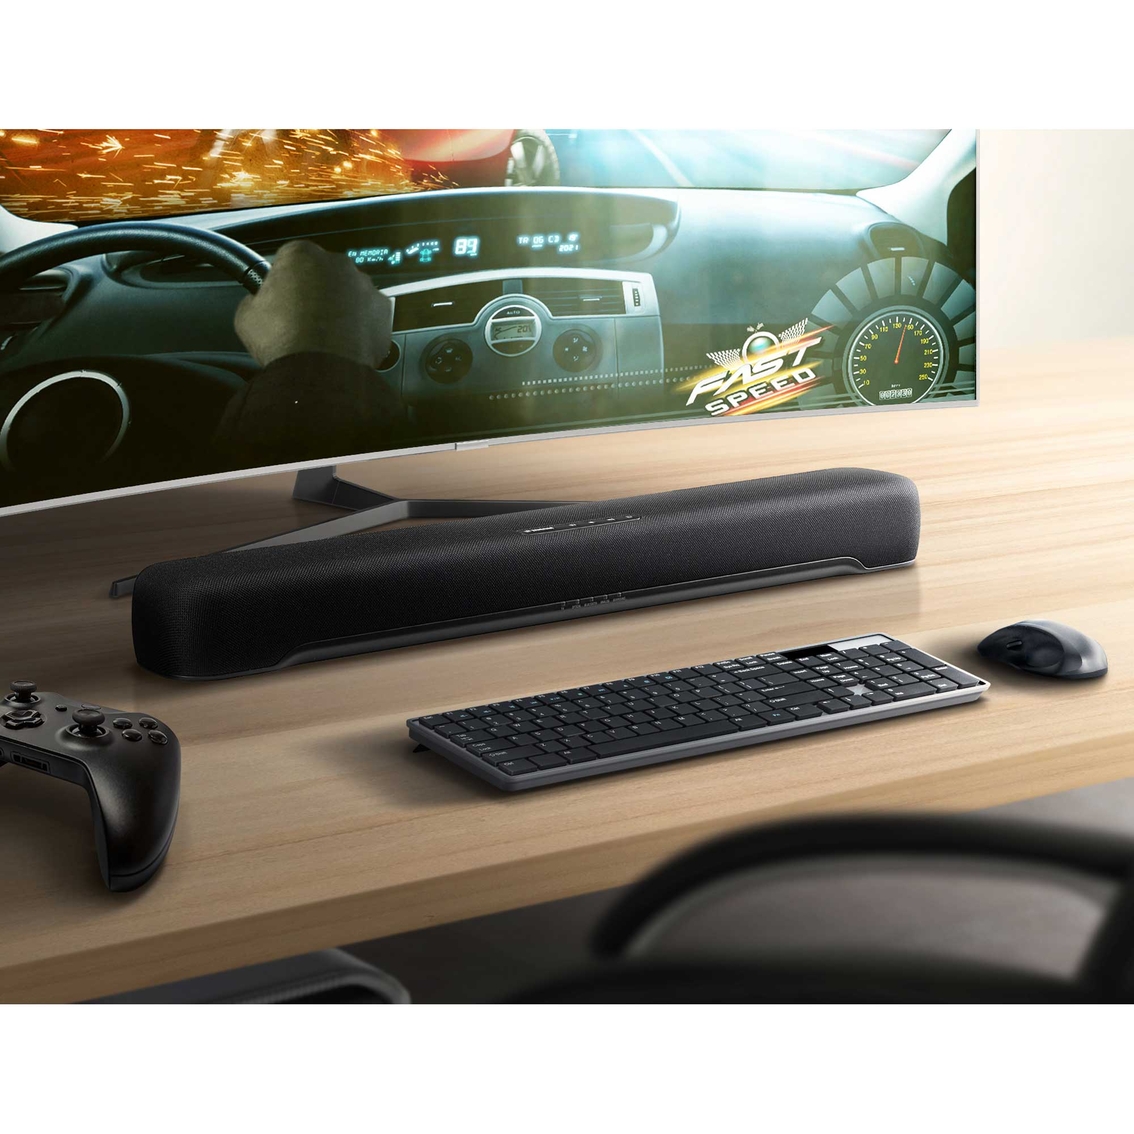 Yamaha Compact Soundbar with Built In Subwoofer and Bluetooth - Image 6 of 6